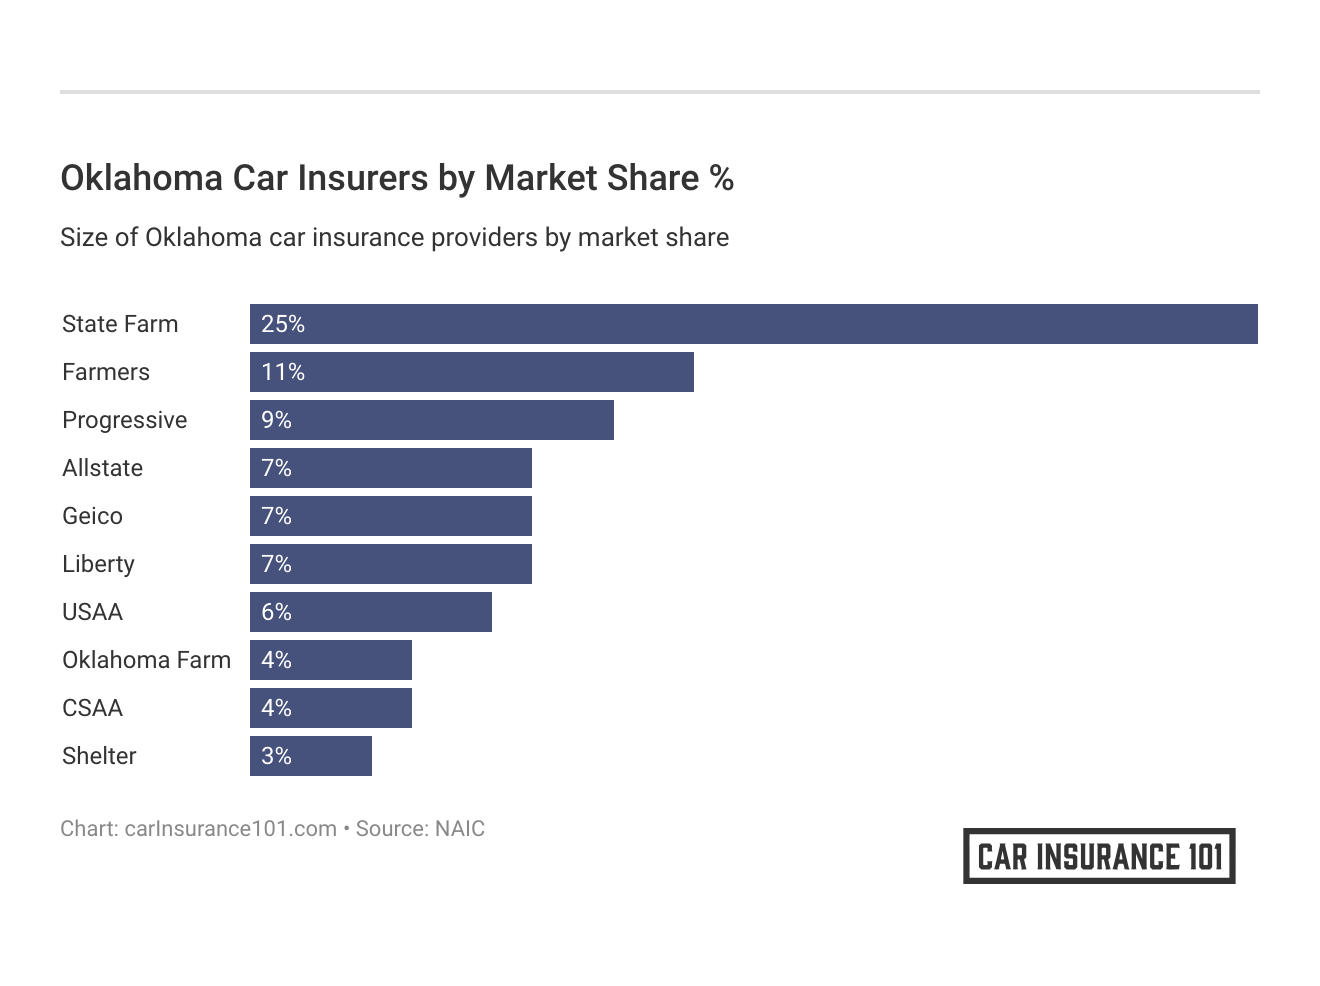 <h3>Oklahoma Car Insurers by Market Share %</h3>